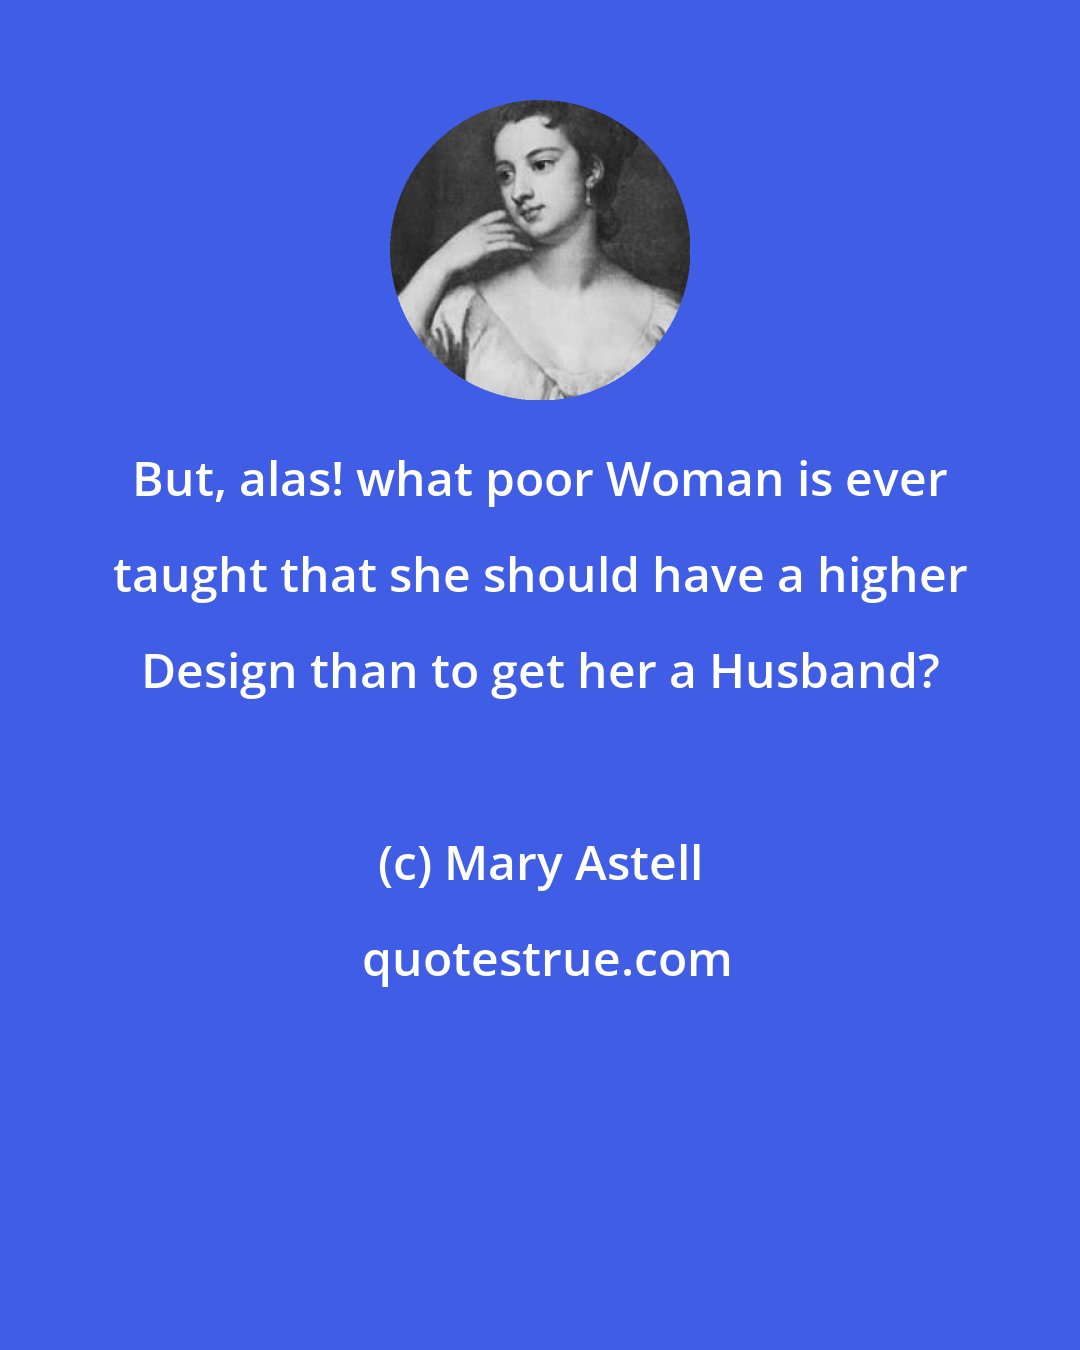 Mary Astell: But, alas! what poor Woman is ever taught that she should have a higher Design than to get her a Husband?